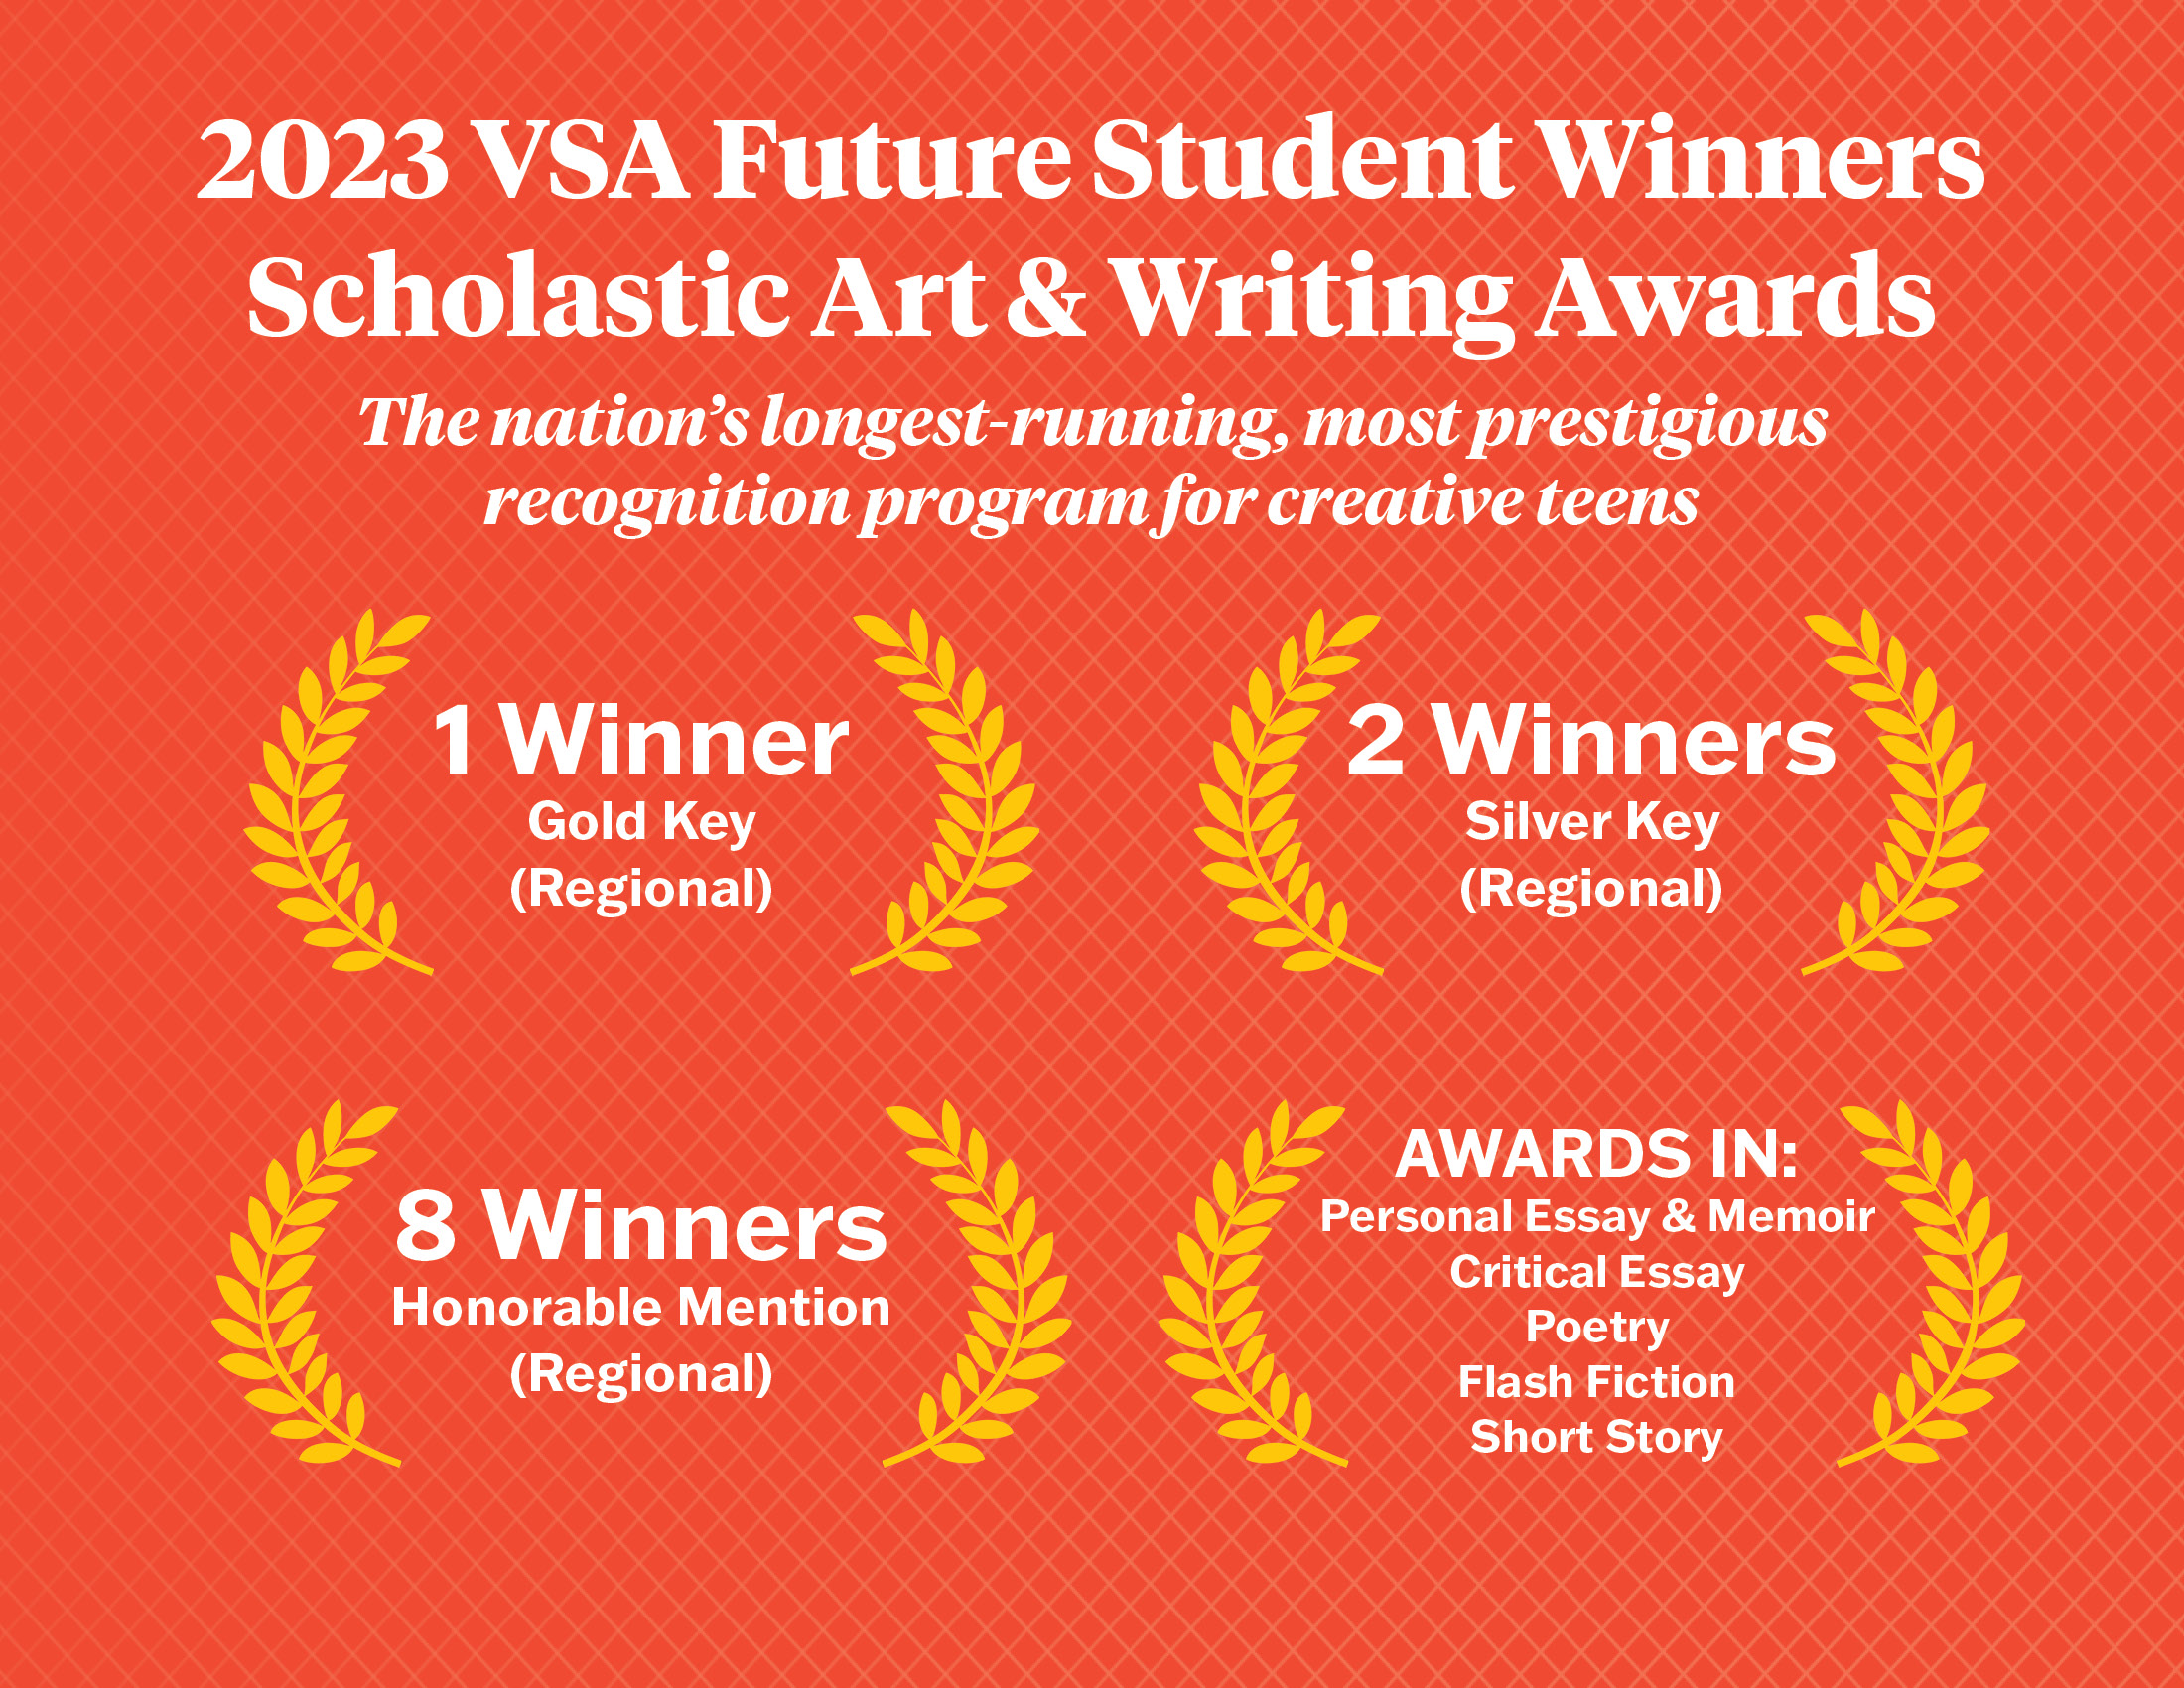 VSA Students Earn 11 Awards in Scholastic Art & Writing Awards 2023